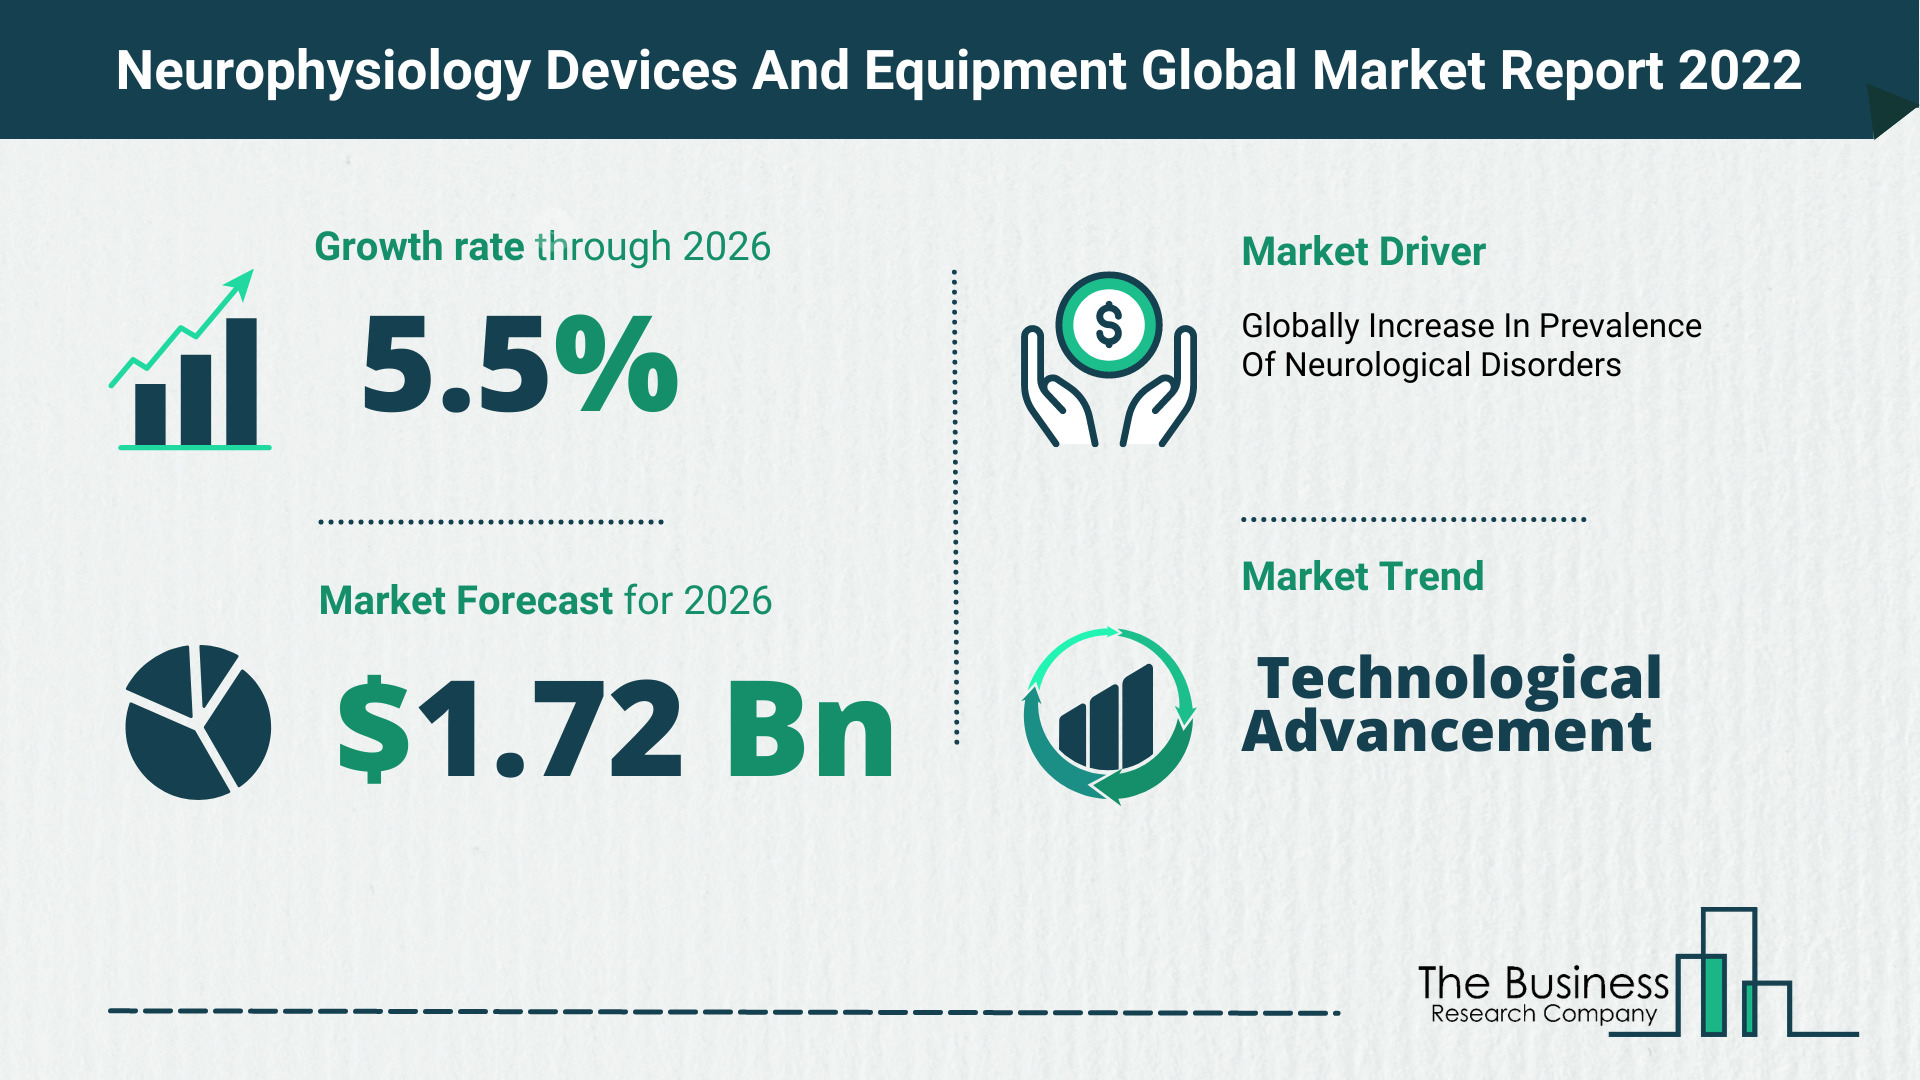 Global Neurophysiology Devices And Equipment Market 2022 – Market Opportunities And Strategies